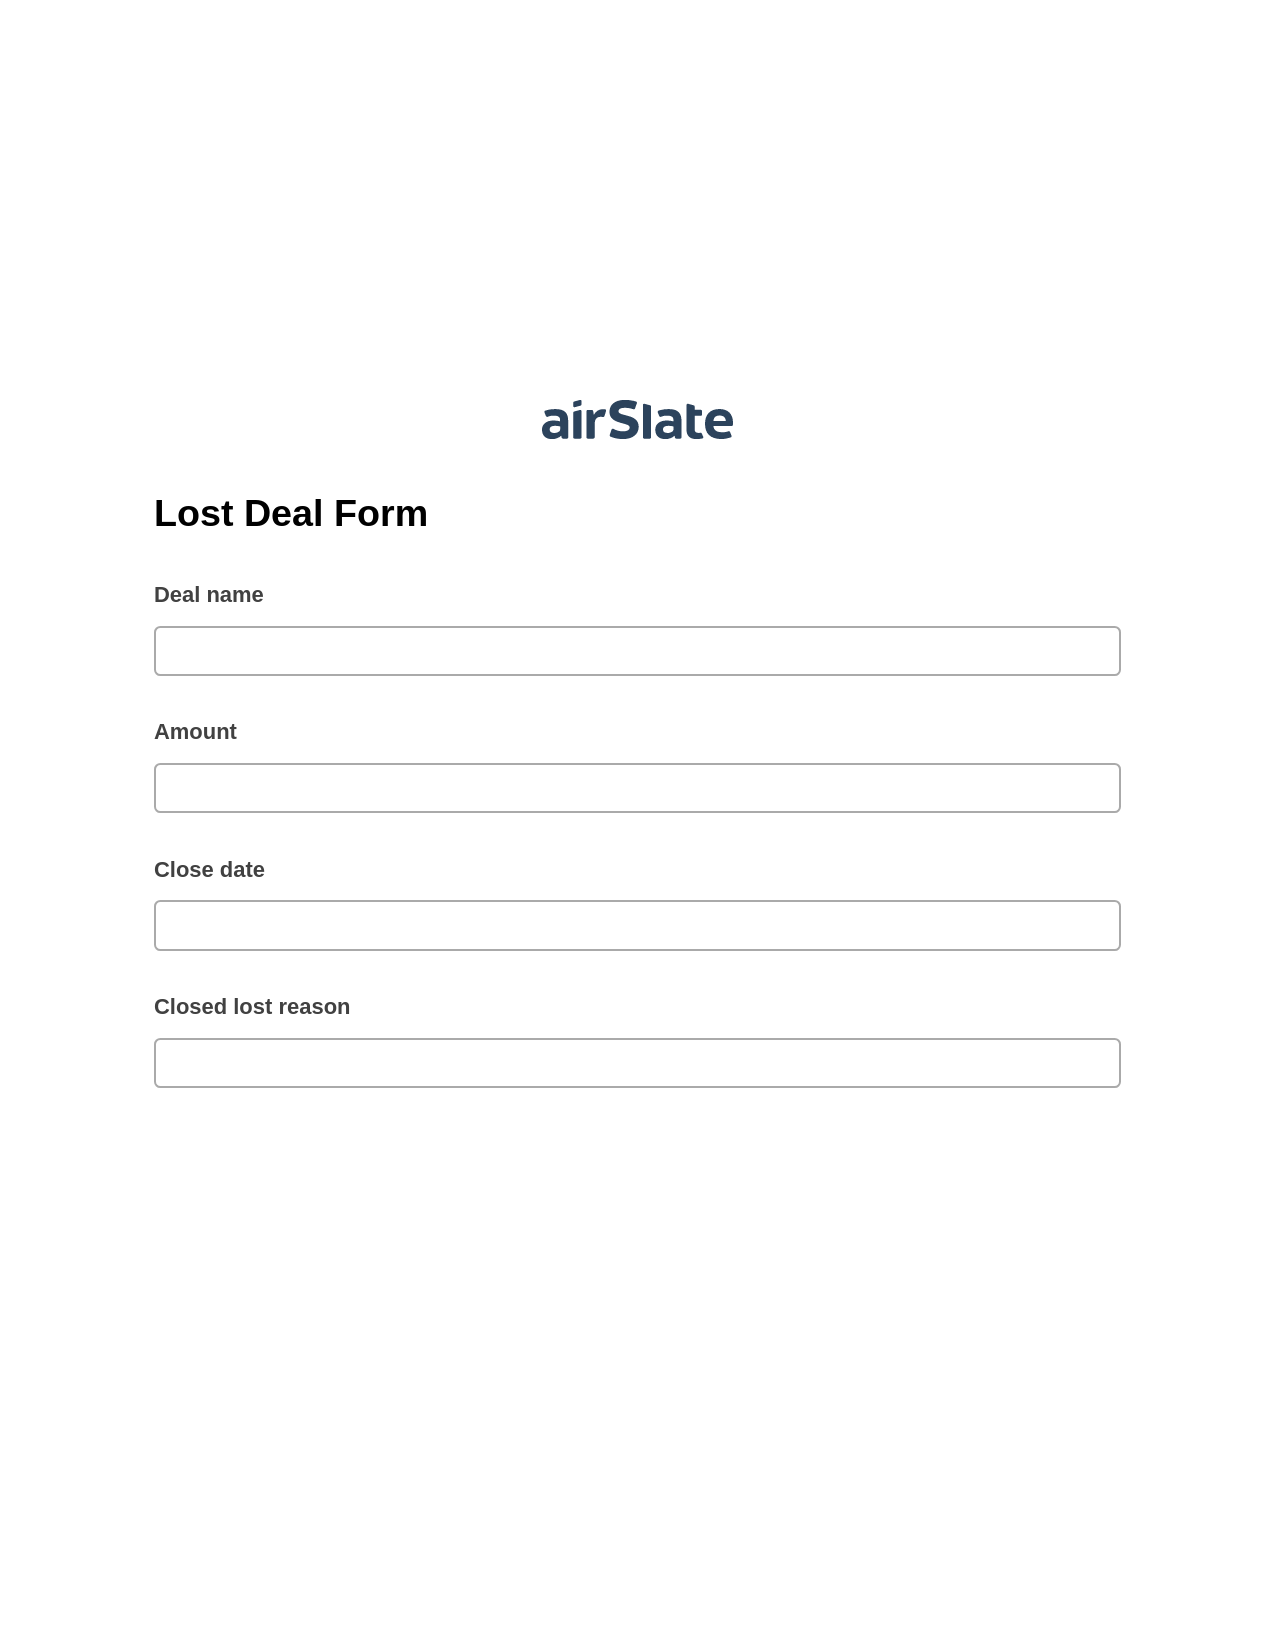 Multirole Lost Deal Form Pre-fill from MySQL Bot, Add Tags to Slate Bot, Export to Smartsheet